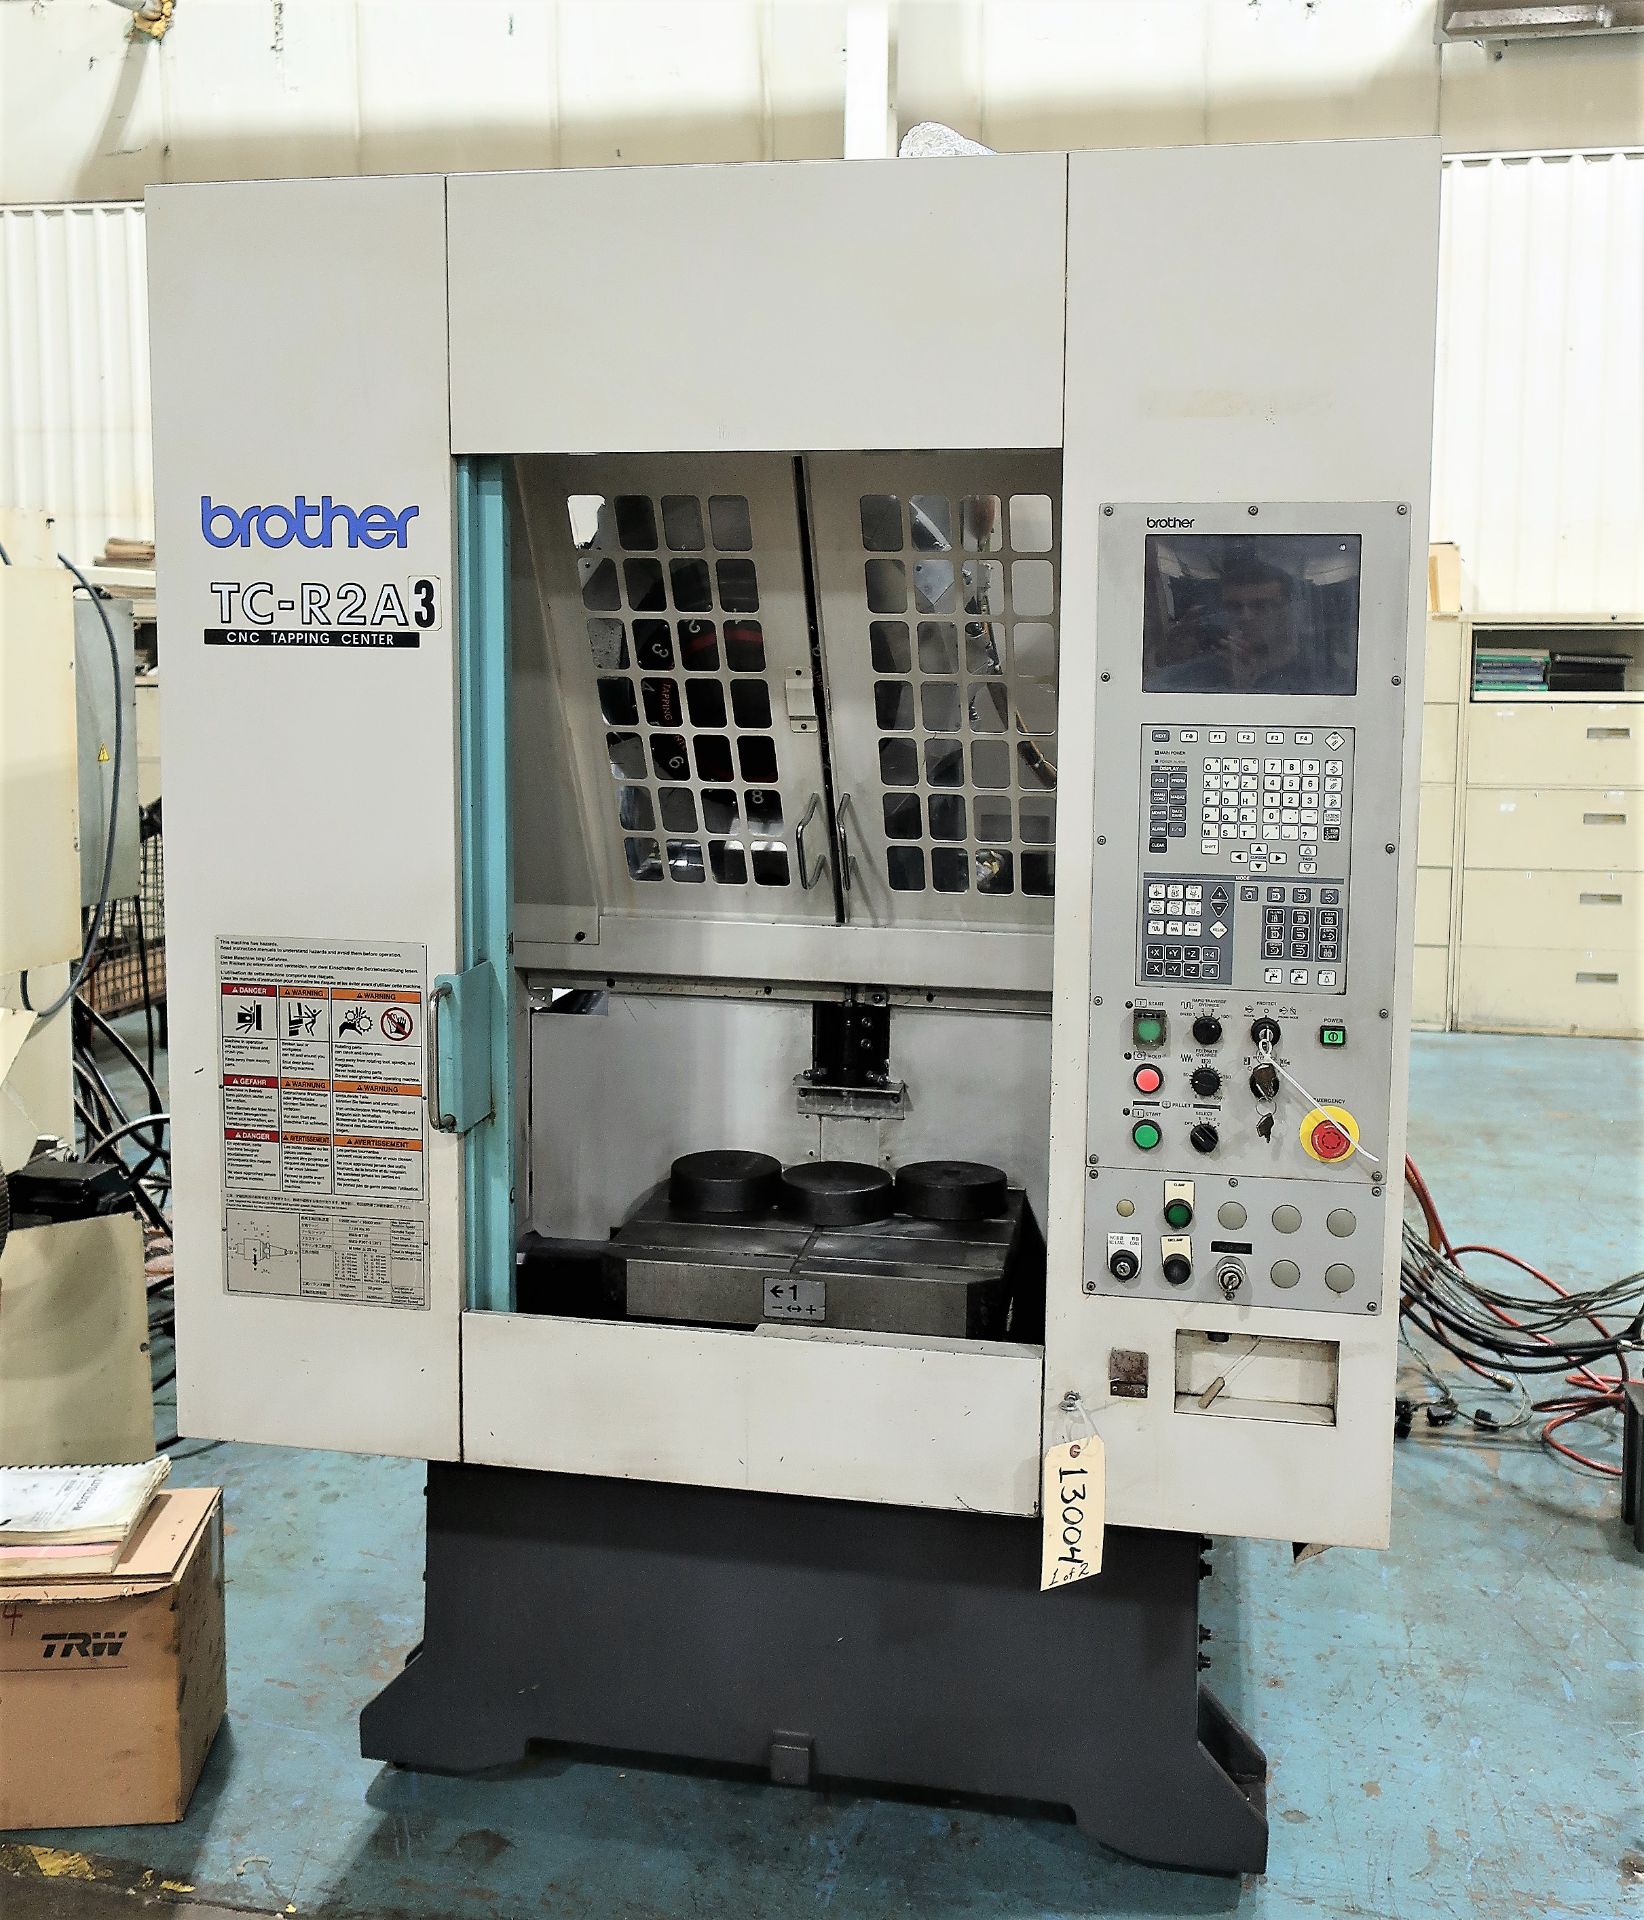 BROTHER TC-R2A CNC DRILL/TAP VERTICAL MACHINING CENTER W/PALLET CHANGER, S/N 111153, NEW 2001